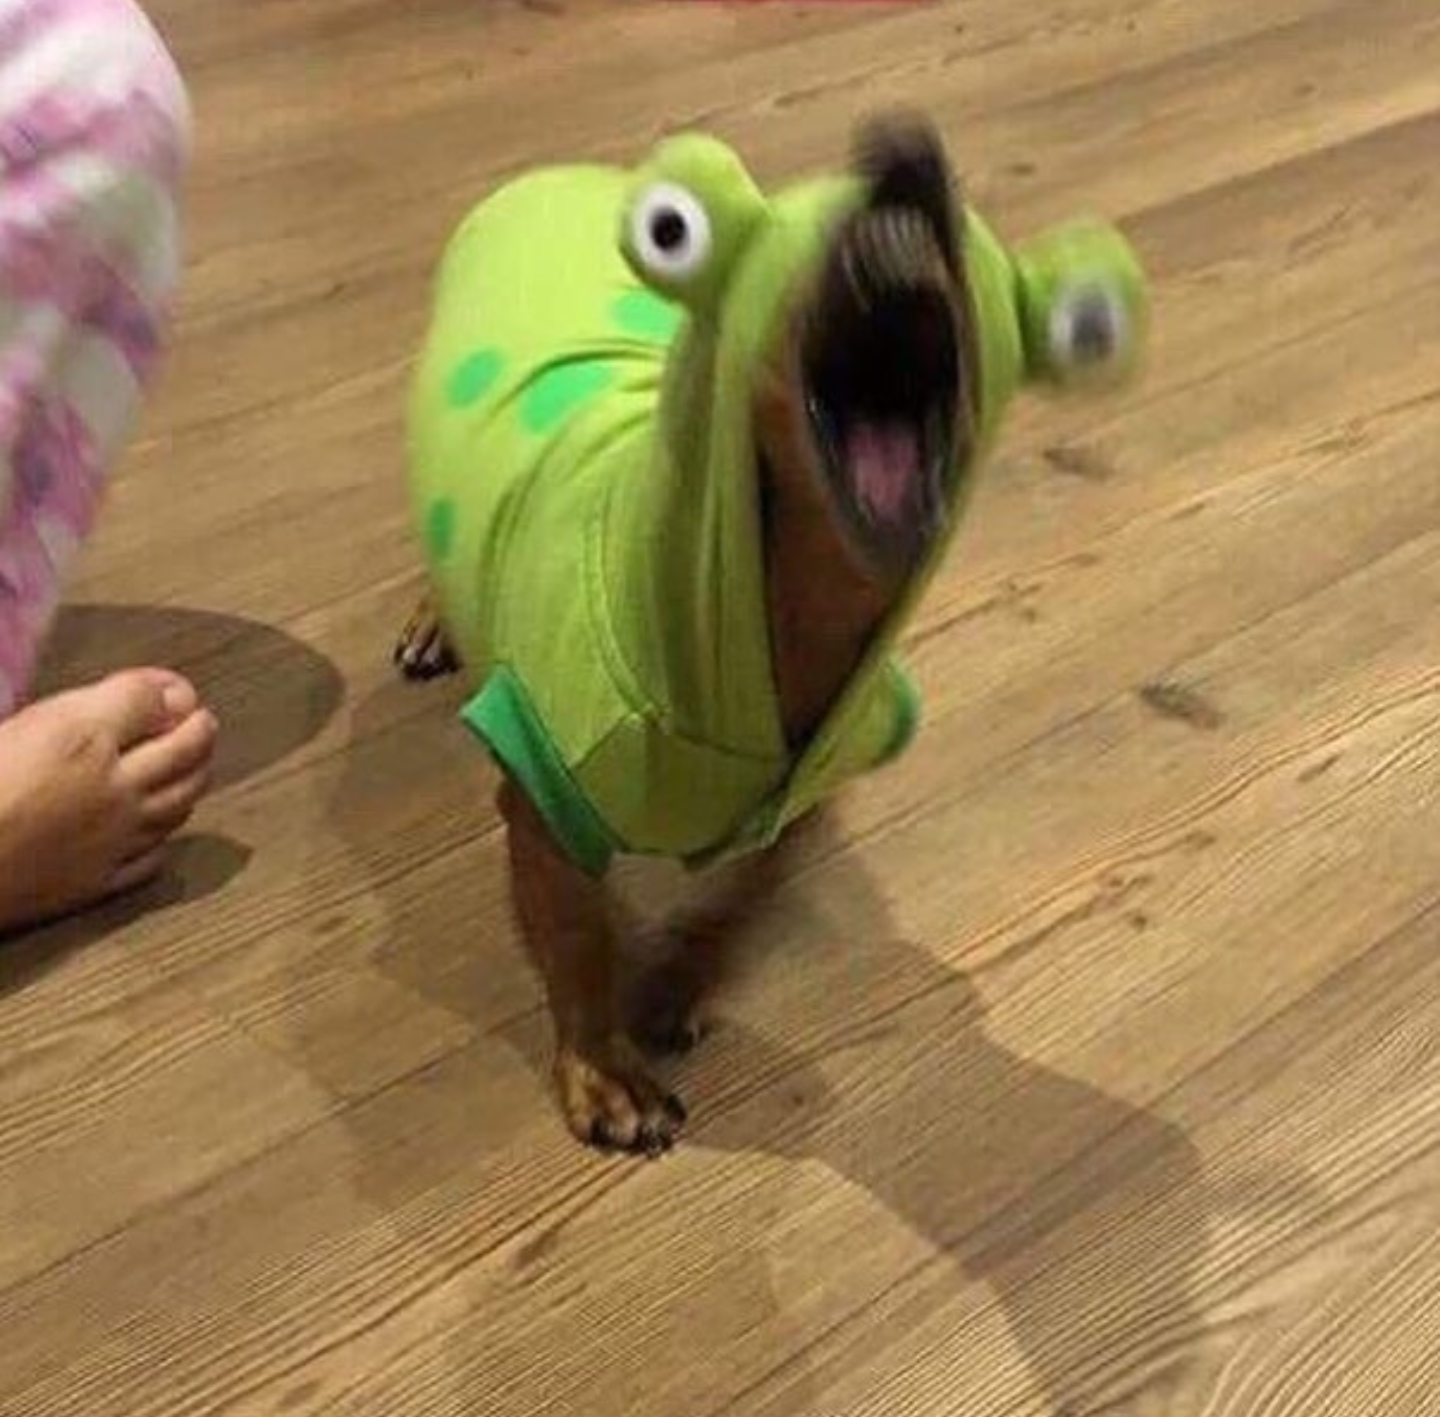 Genuinely cant tell if this dog wearing a costume is funny or absolutely horrifying